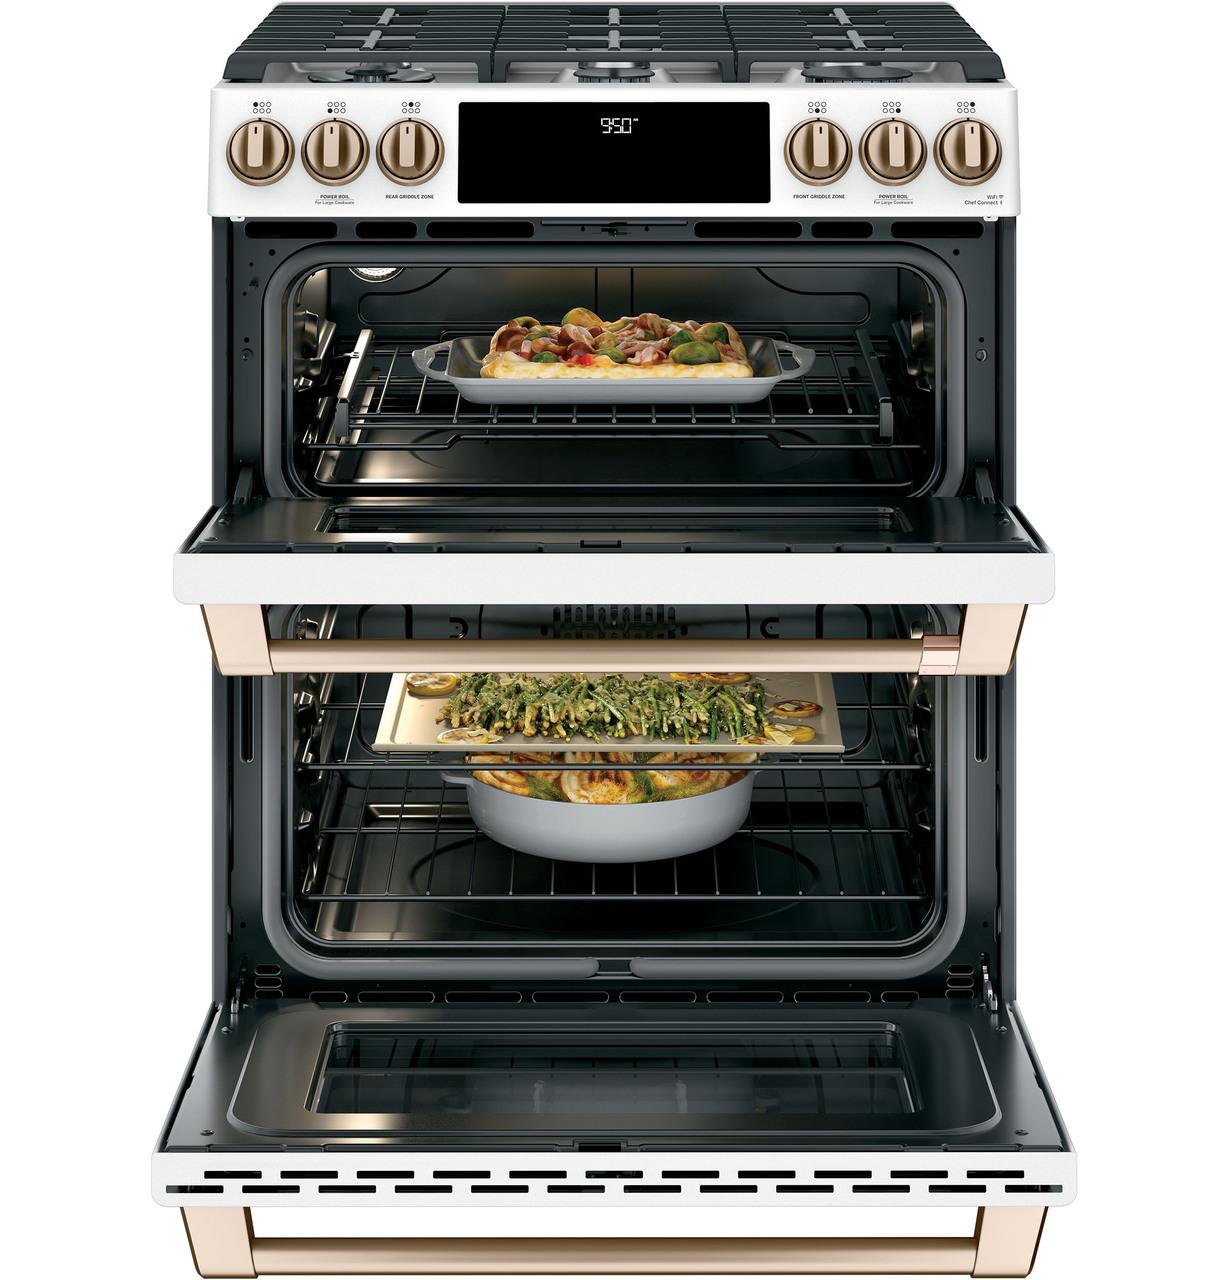 Cafe Caf(eback)™ 30" Smart Slide-In, Front-Control, Dual-Fuel, Double-Oven Range with Convection